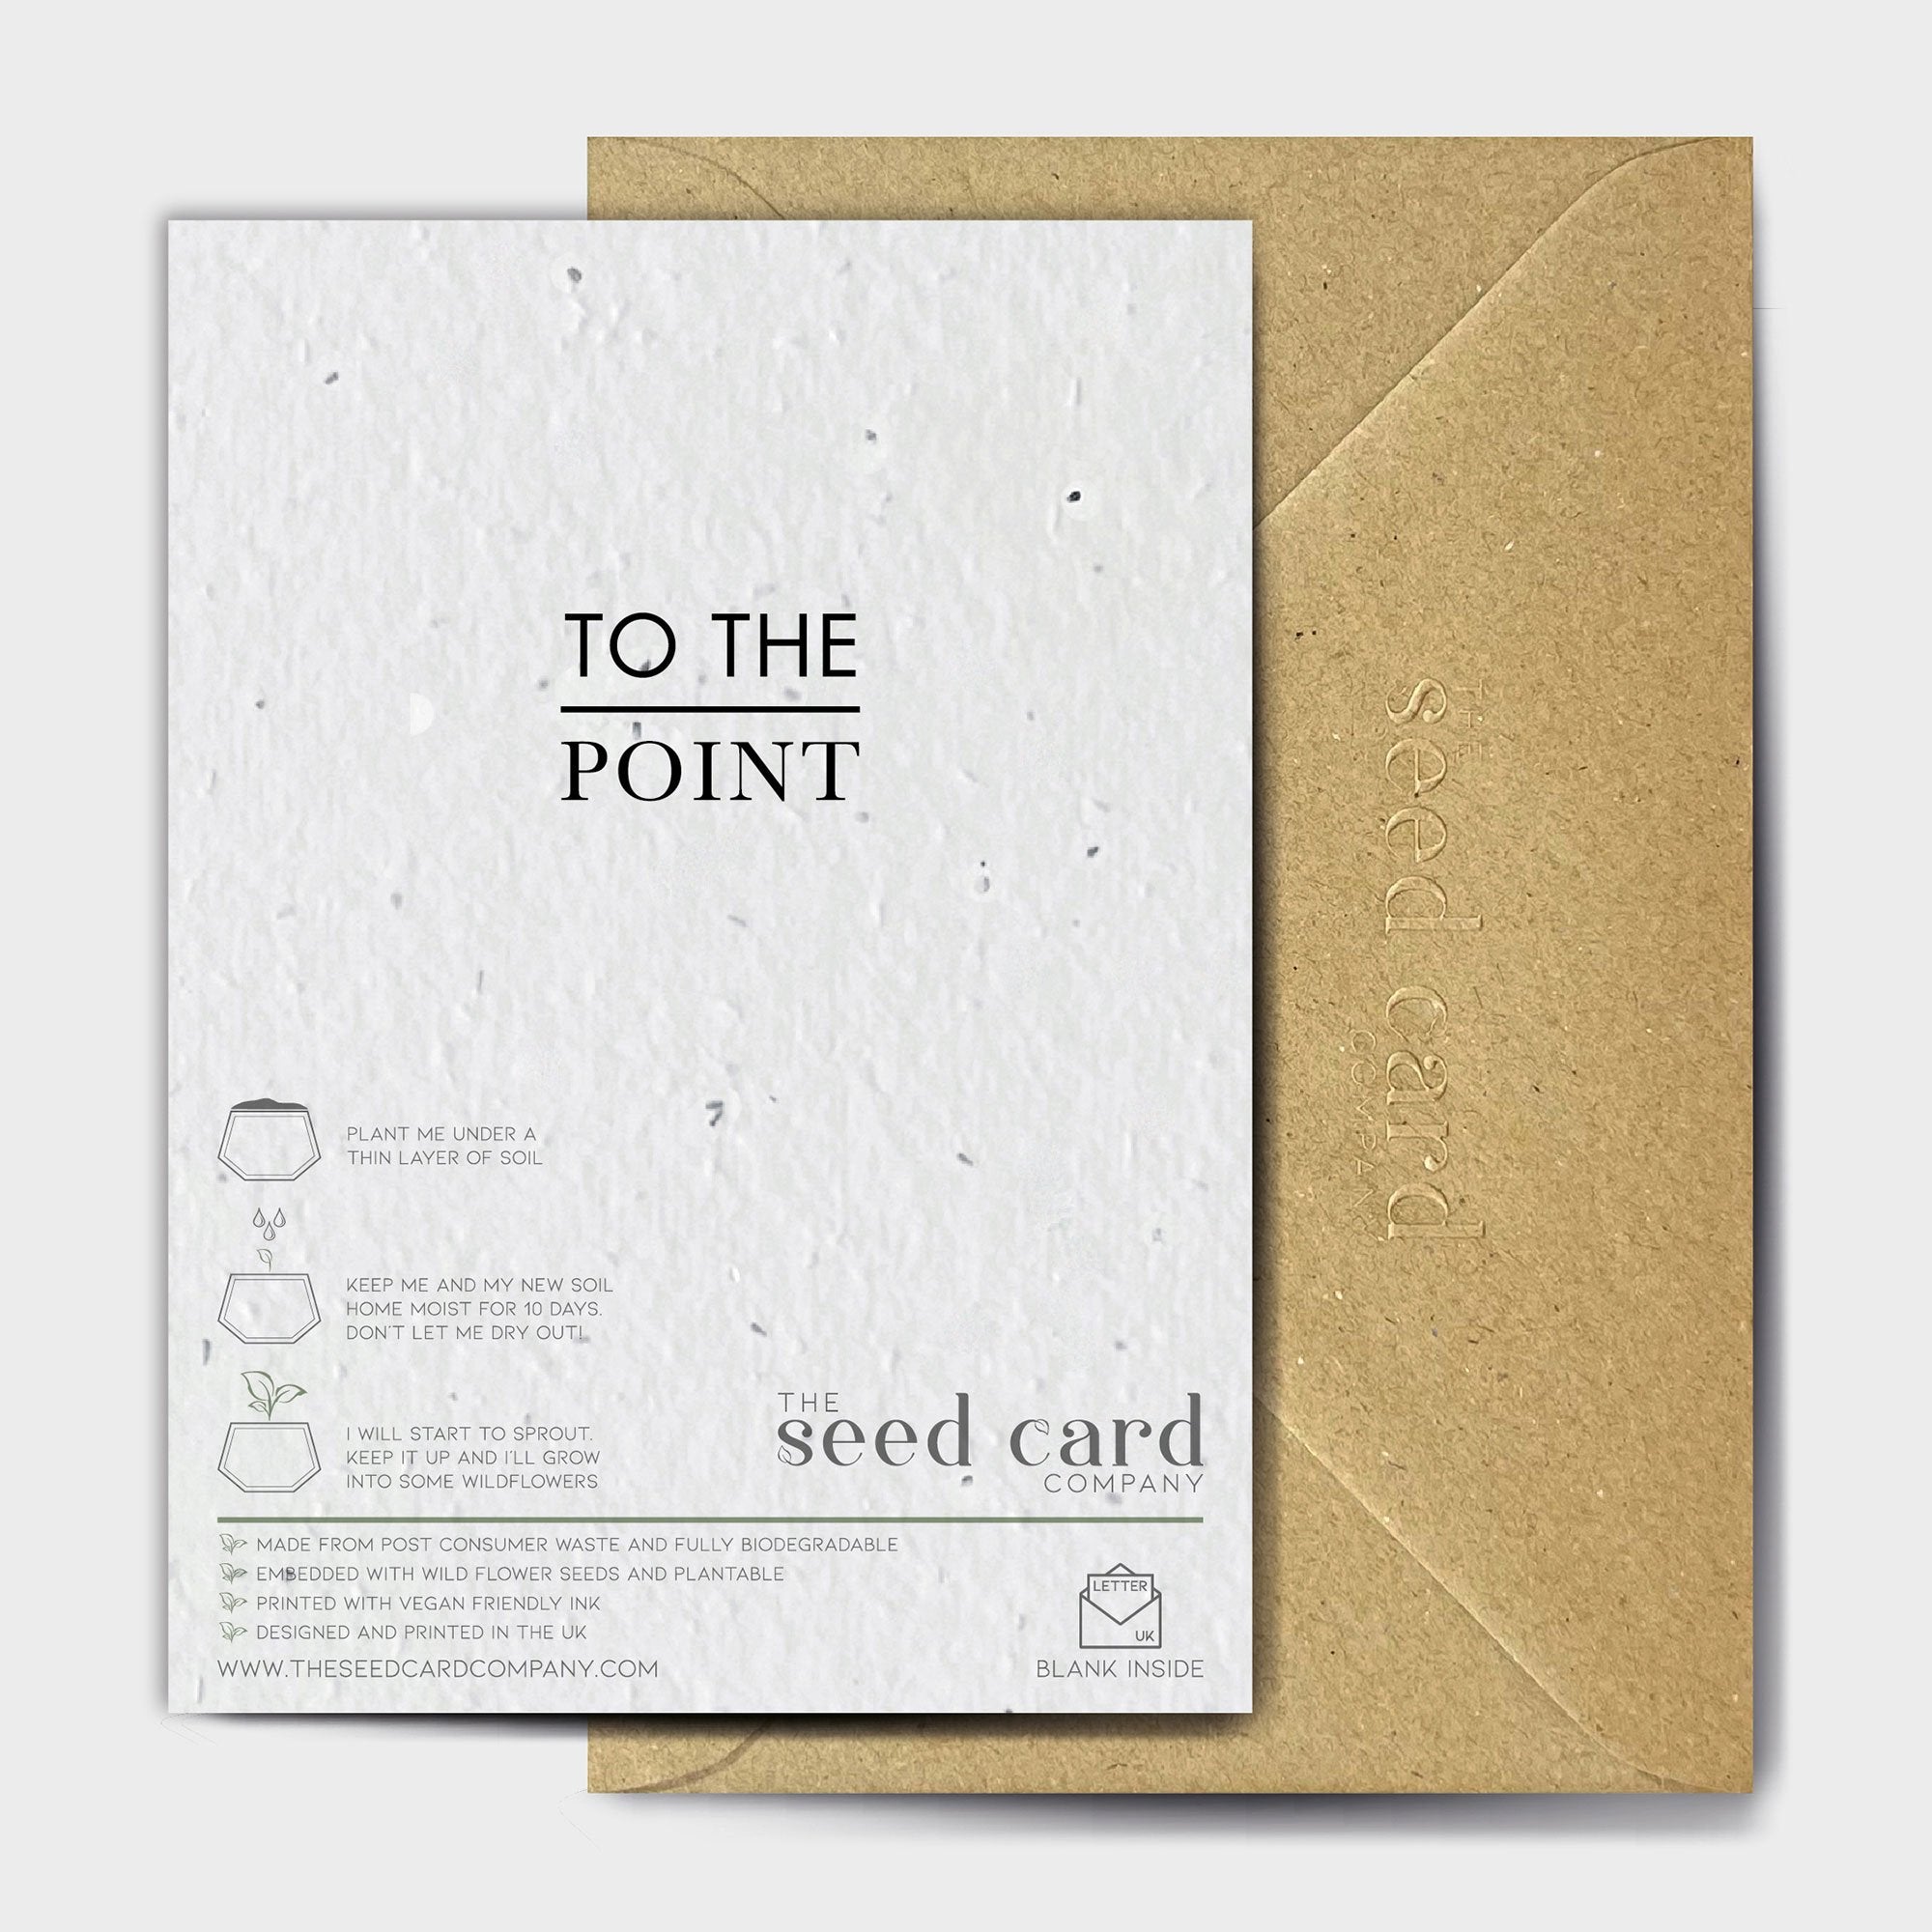 Shop online Recycled Greetings - 100% biodegradable seed-embedded cards Shop -The Seed Card Company